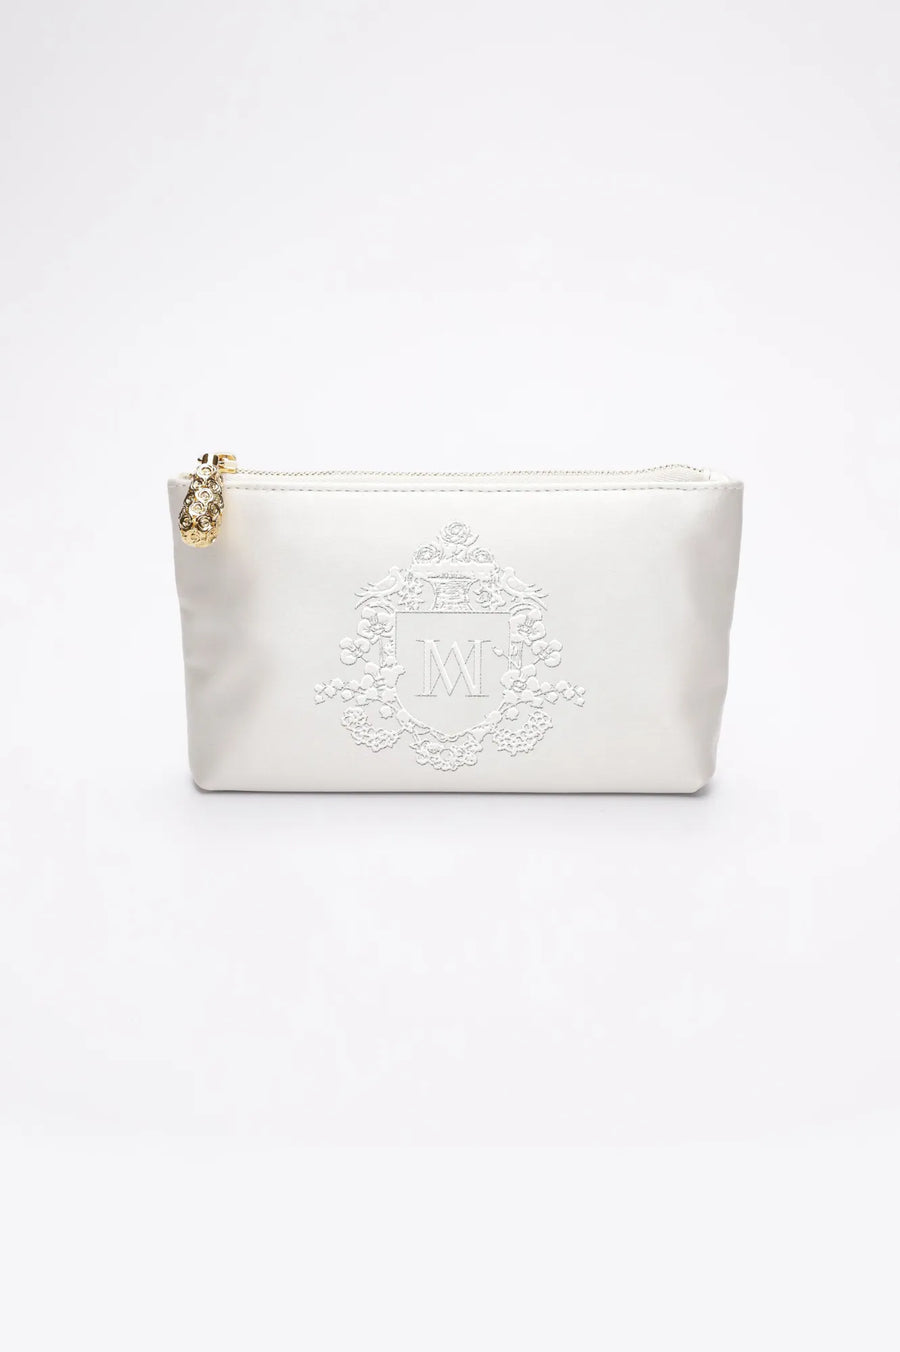 Mia Ivory Satin Zipper Pouch with bridal crest monogram embroidery.